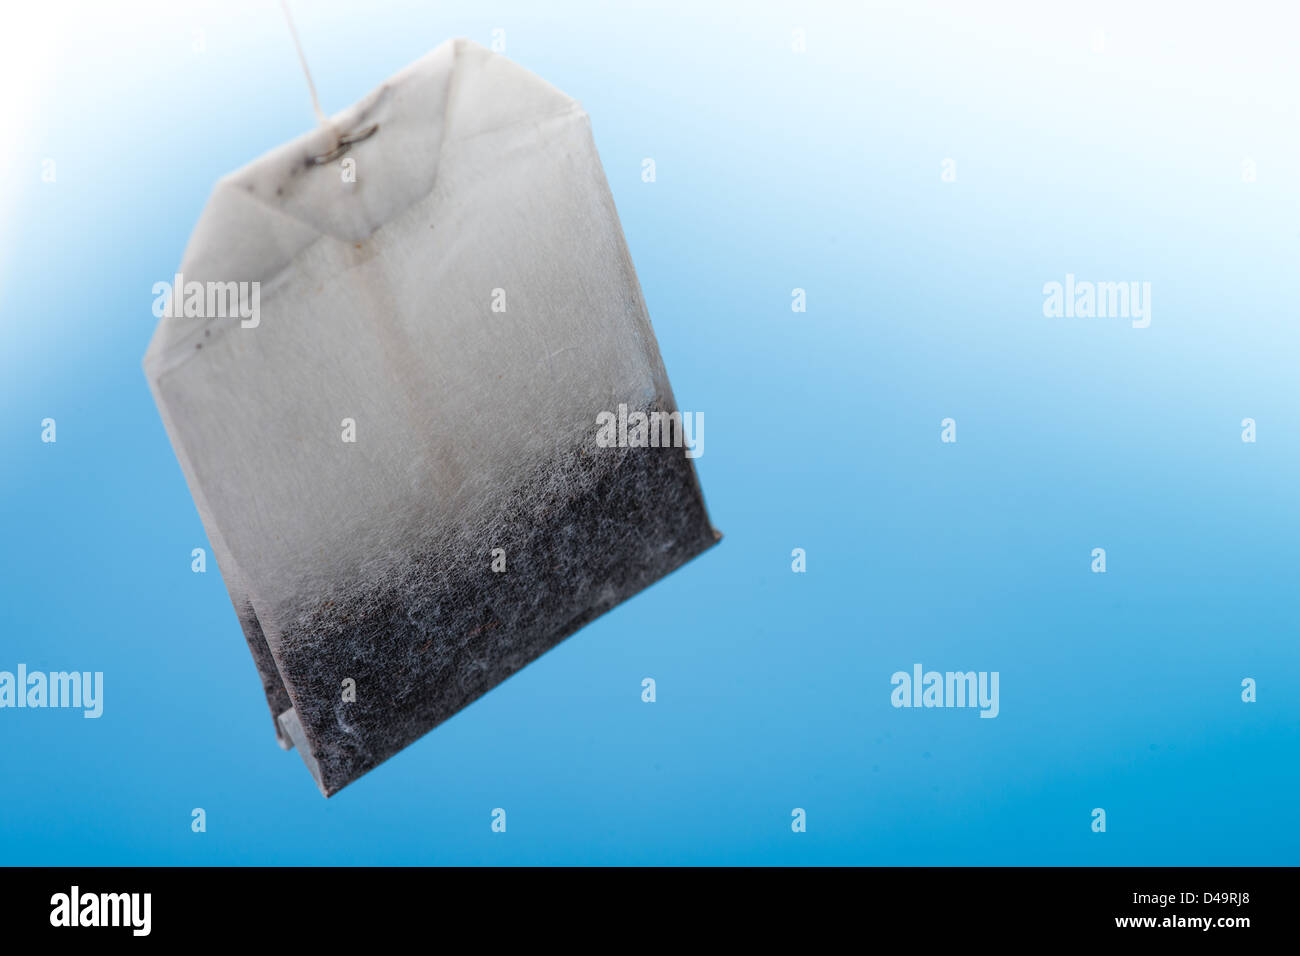 Unused Teabag cutout  over a blue background Stock Photo